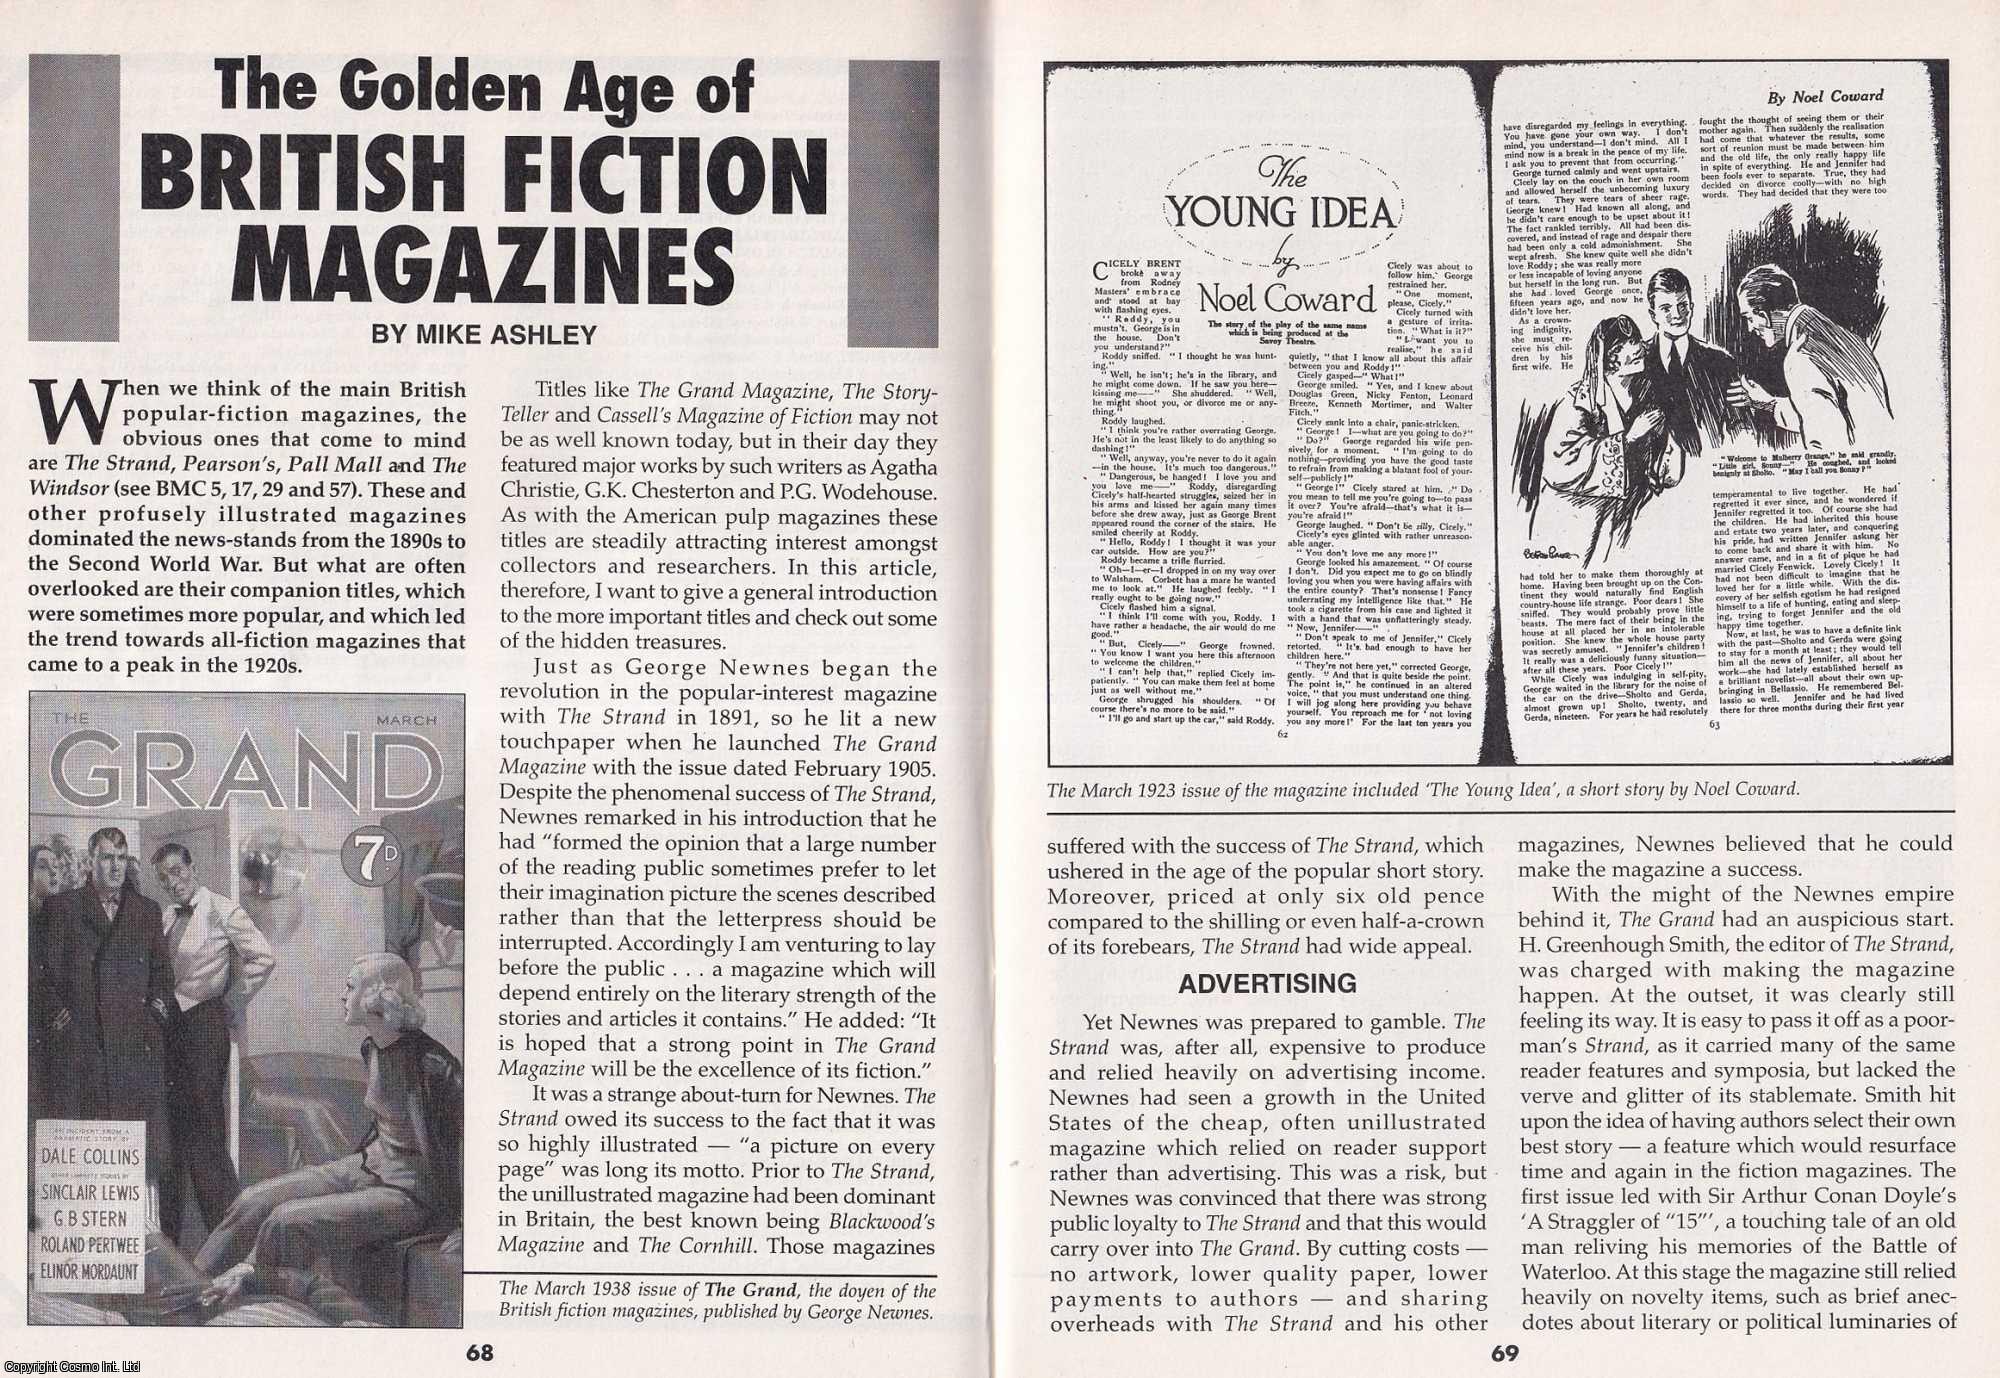 Mike Ashley - The Golden Age of British Fiction Magazines. This is an original article separated from an issue of The Book & Magazine Collector publication.